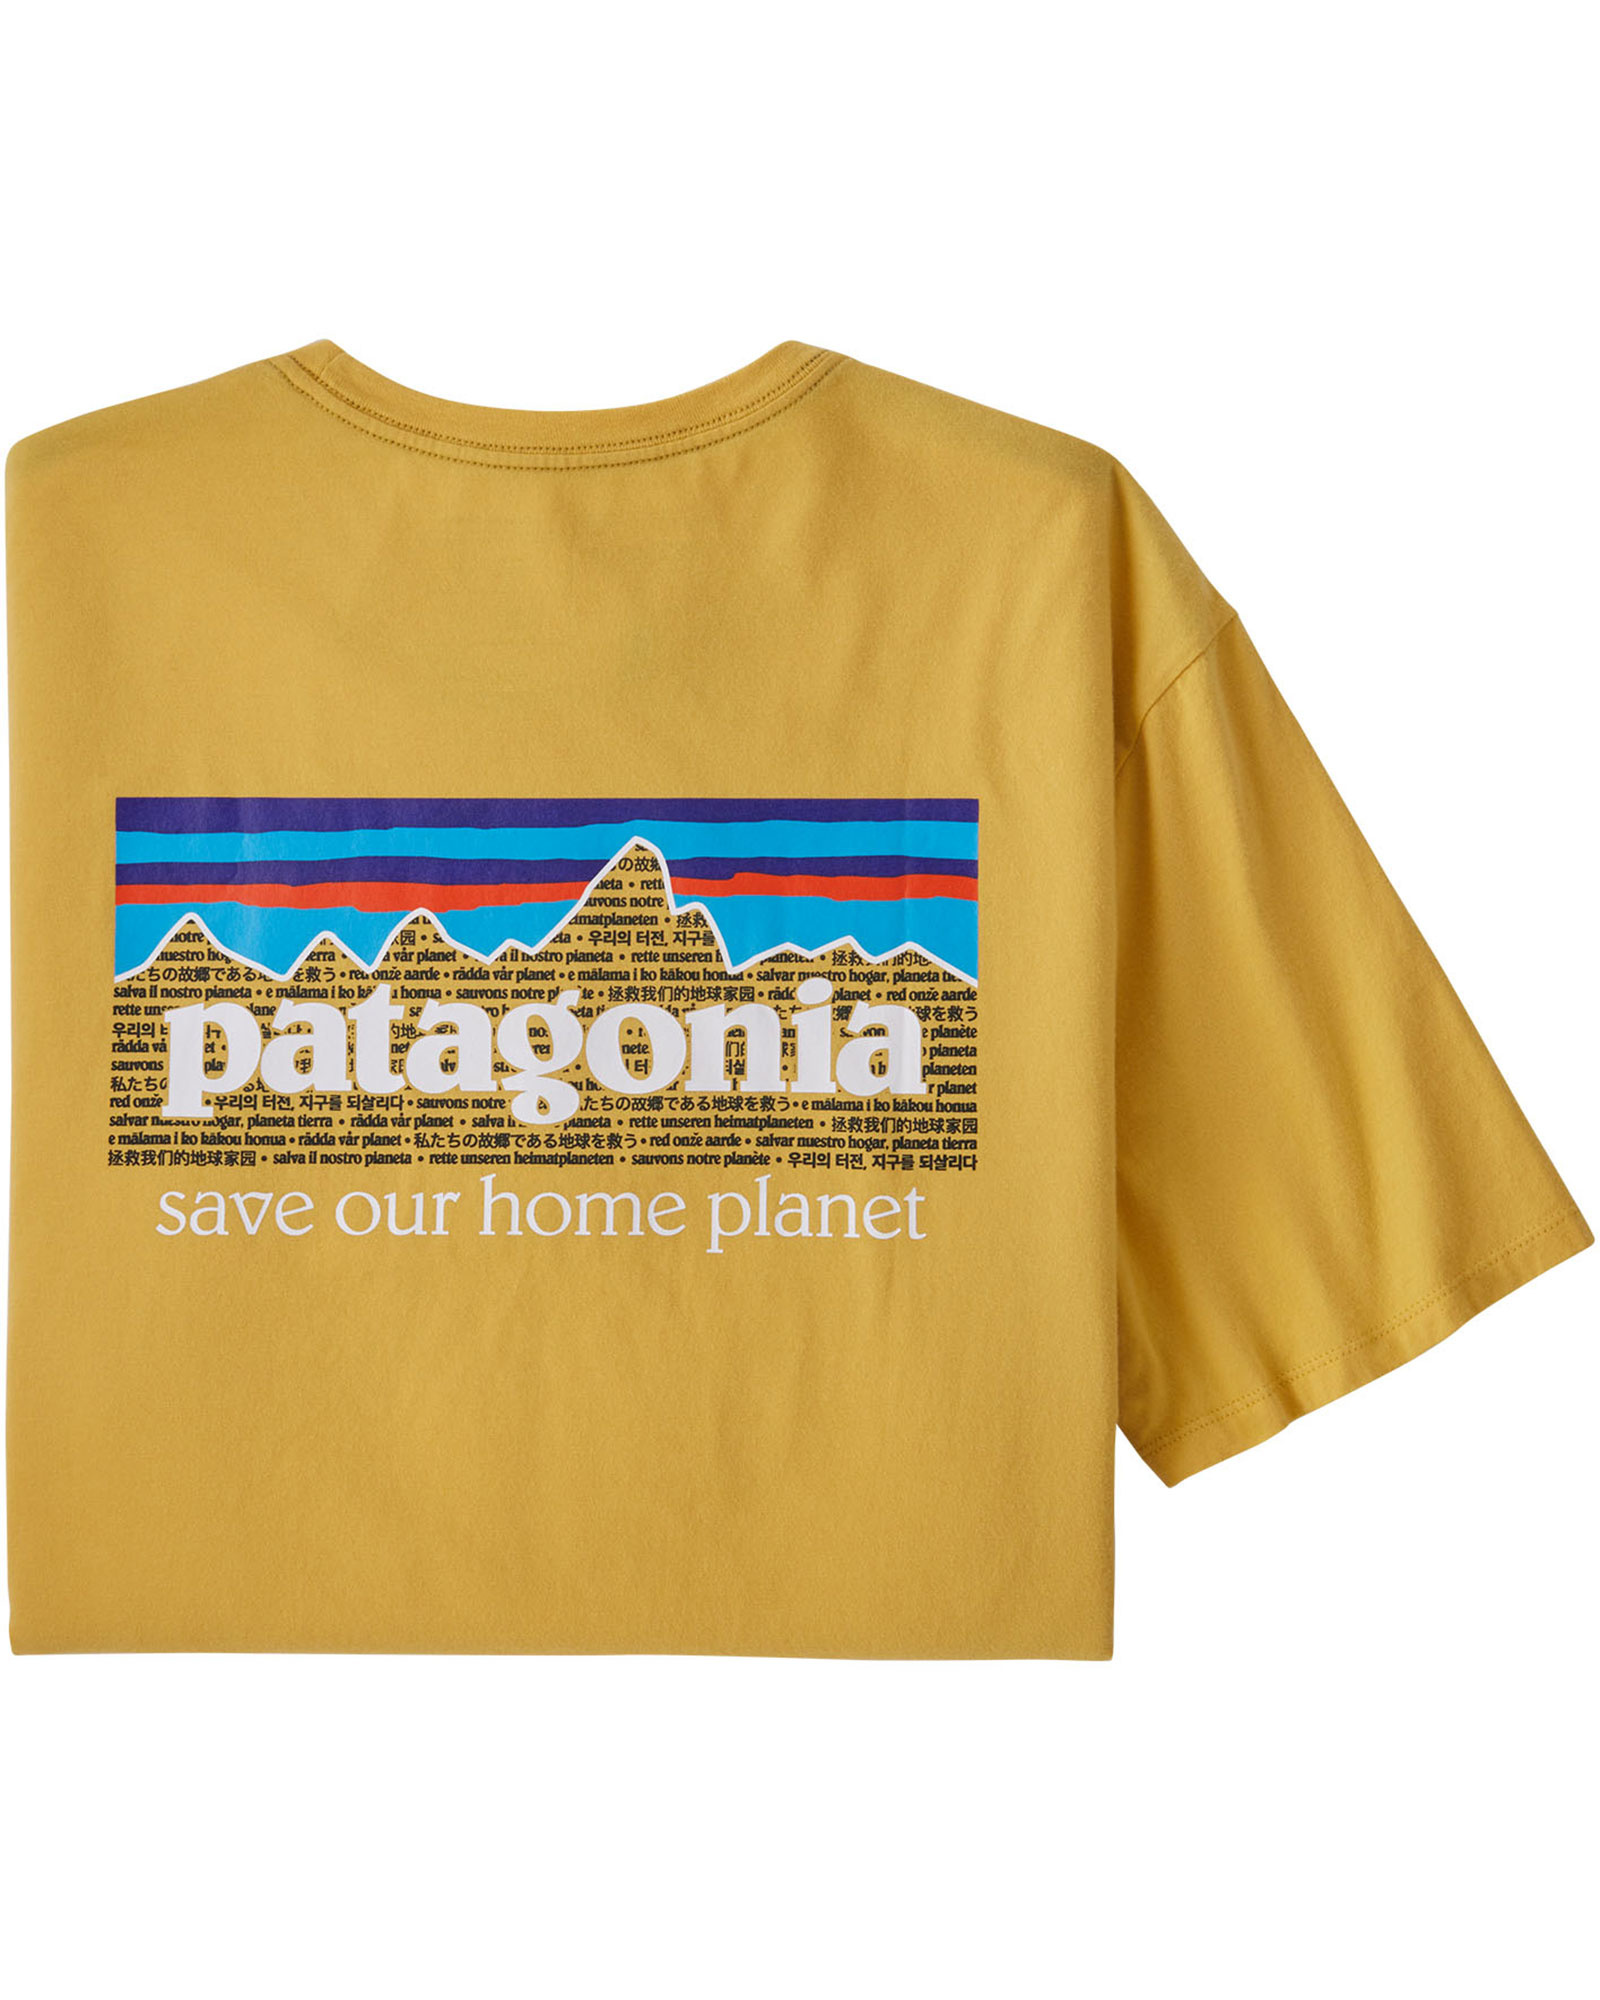 Patagonia P 6 Mission Men’s Organic Cotton Tee - Surfboard Yellow S